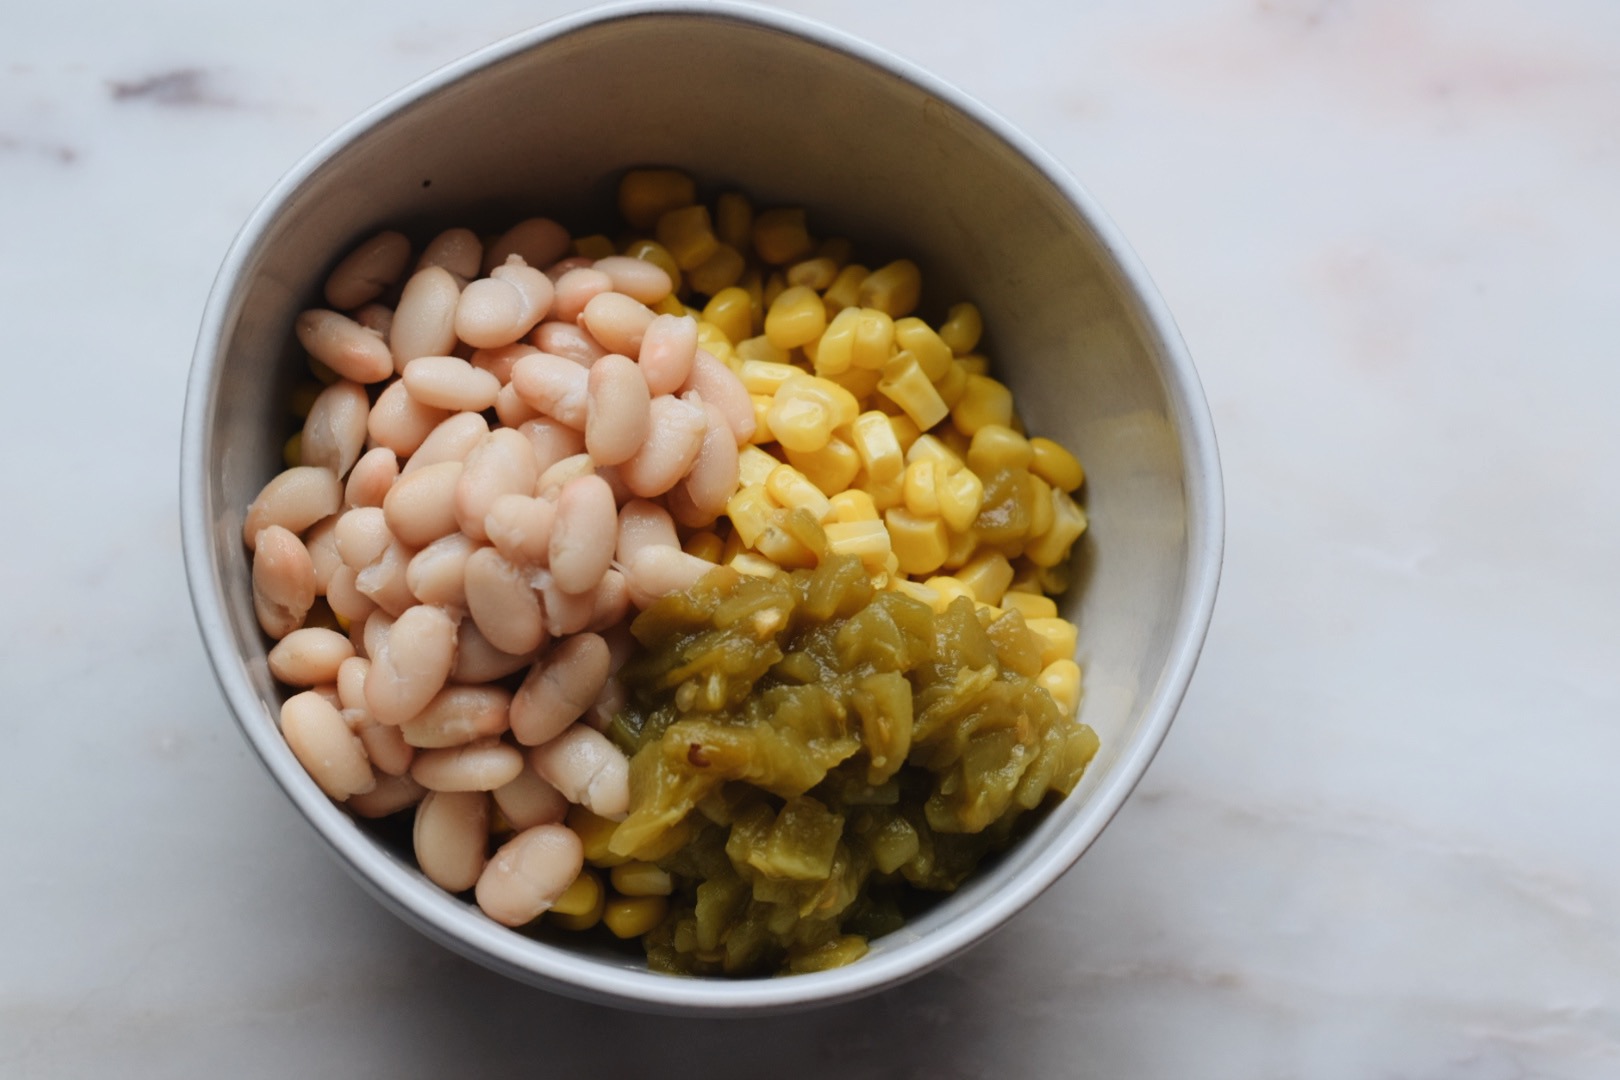 beans, corn and chilies in a bowl